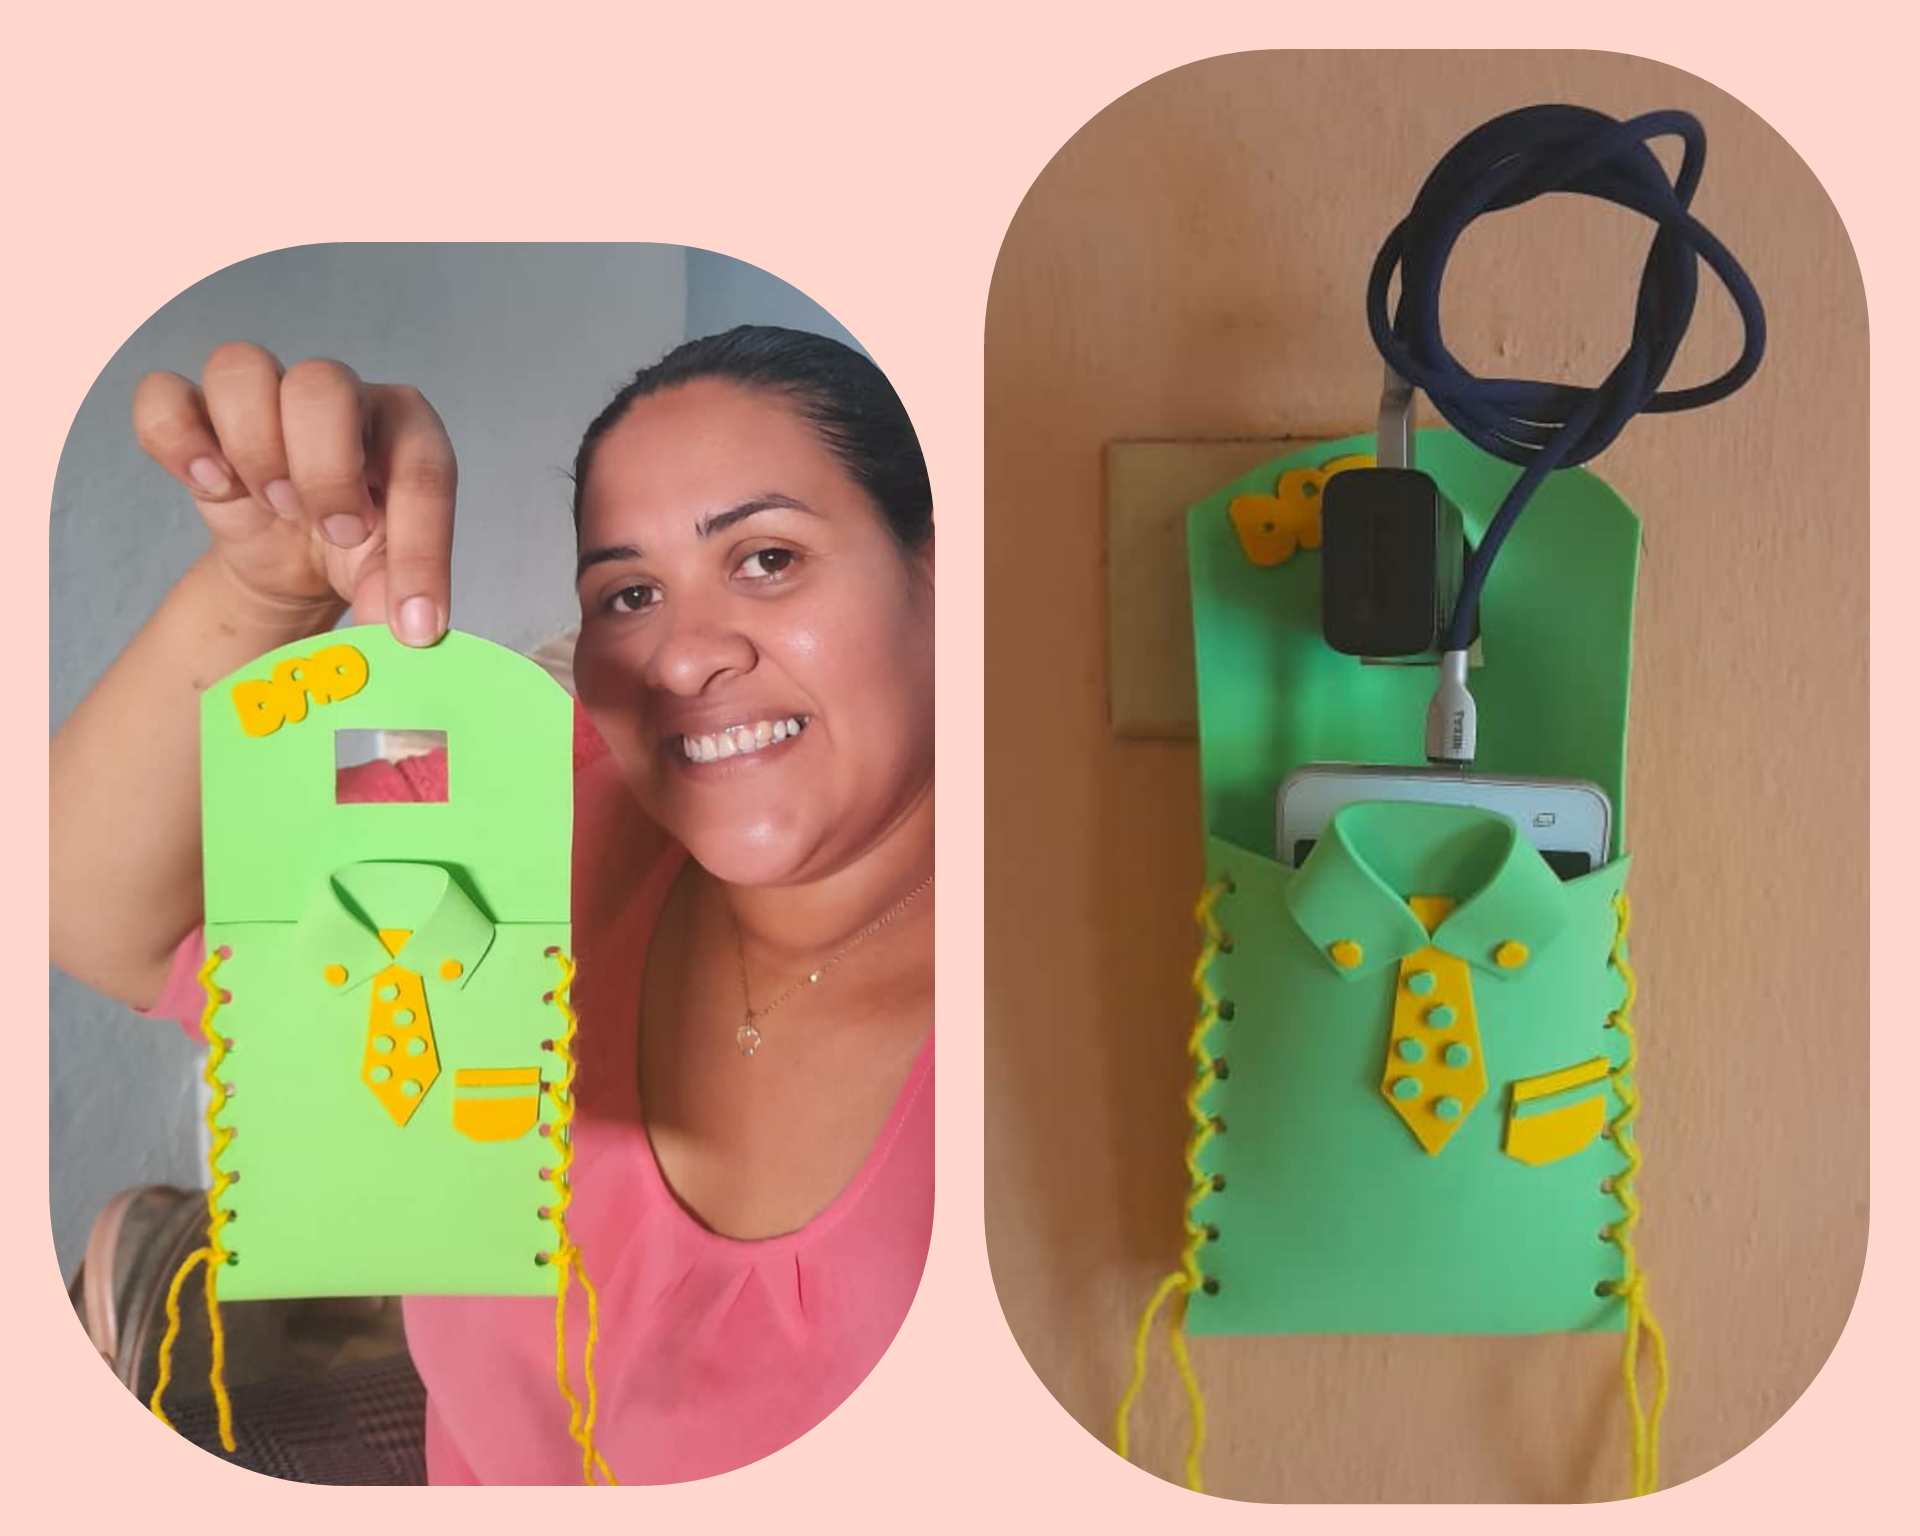 ENG/ESP] Beautiful charger holder to give as a gift on Father's Day ||  Hermoso porta-cargador para obsequiar el dia del Padre!!! [TUTORIAL] — Hive